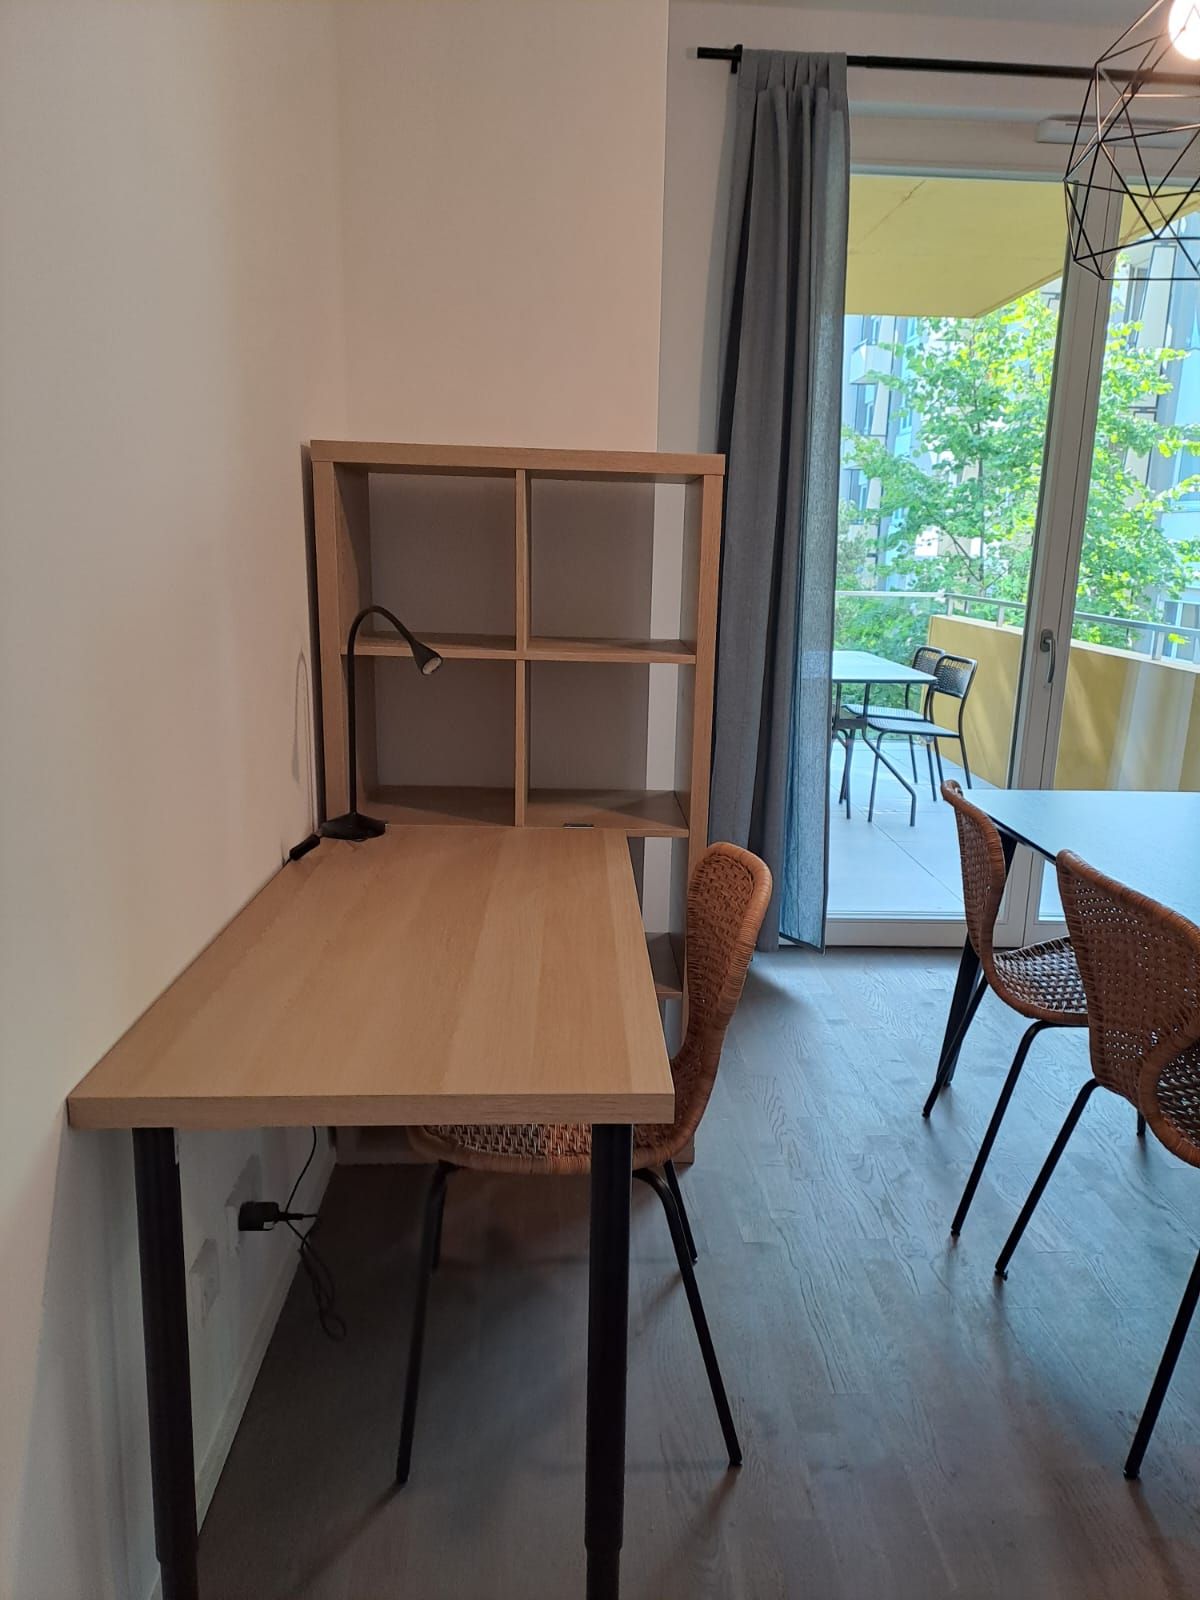 Brand new: stylish, fully furnished 2-room apartment with fitted kitchen and balcony in Berlin